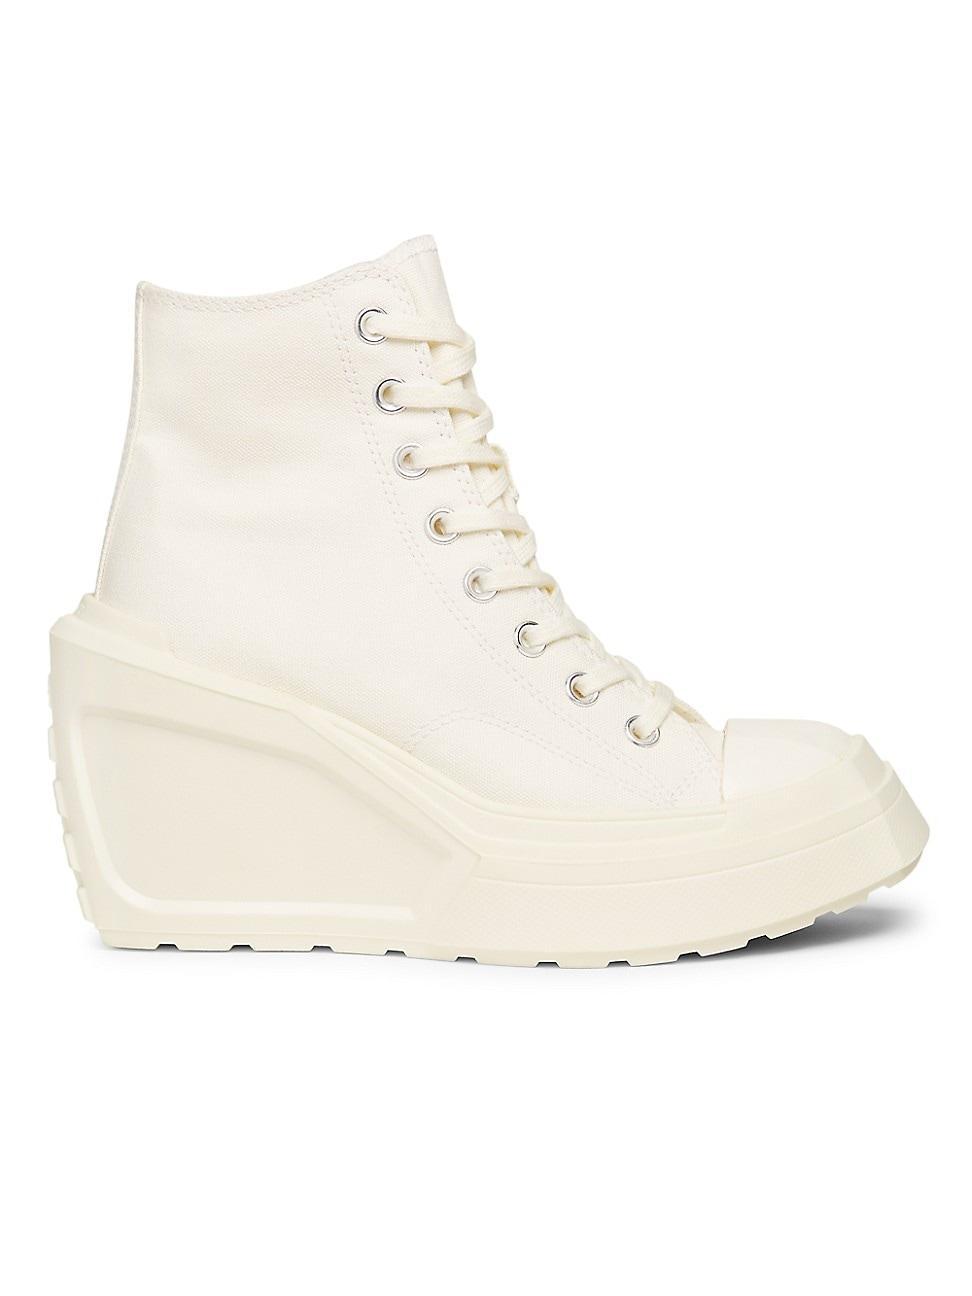 Womens New Form Chuck 70 De Luxe Wedge Sneakers Product Image